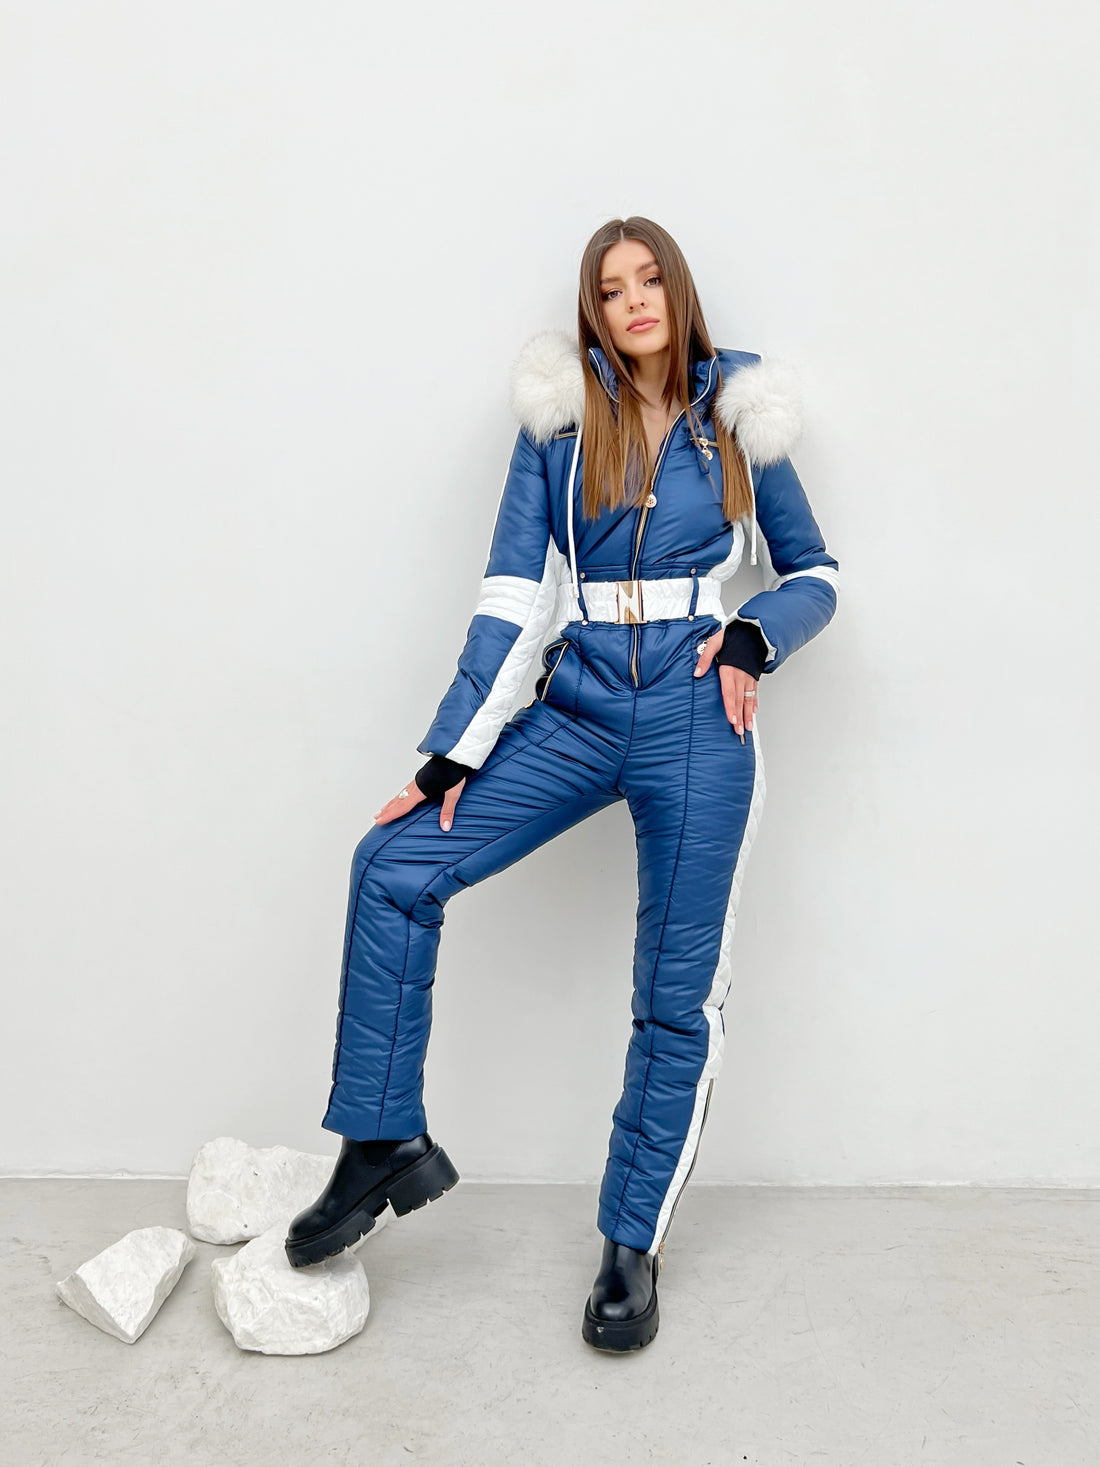 Woman onsie for winter DENALI - Navy blue - White classic ski suit